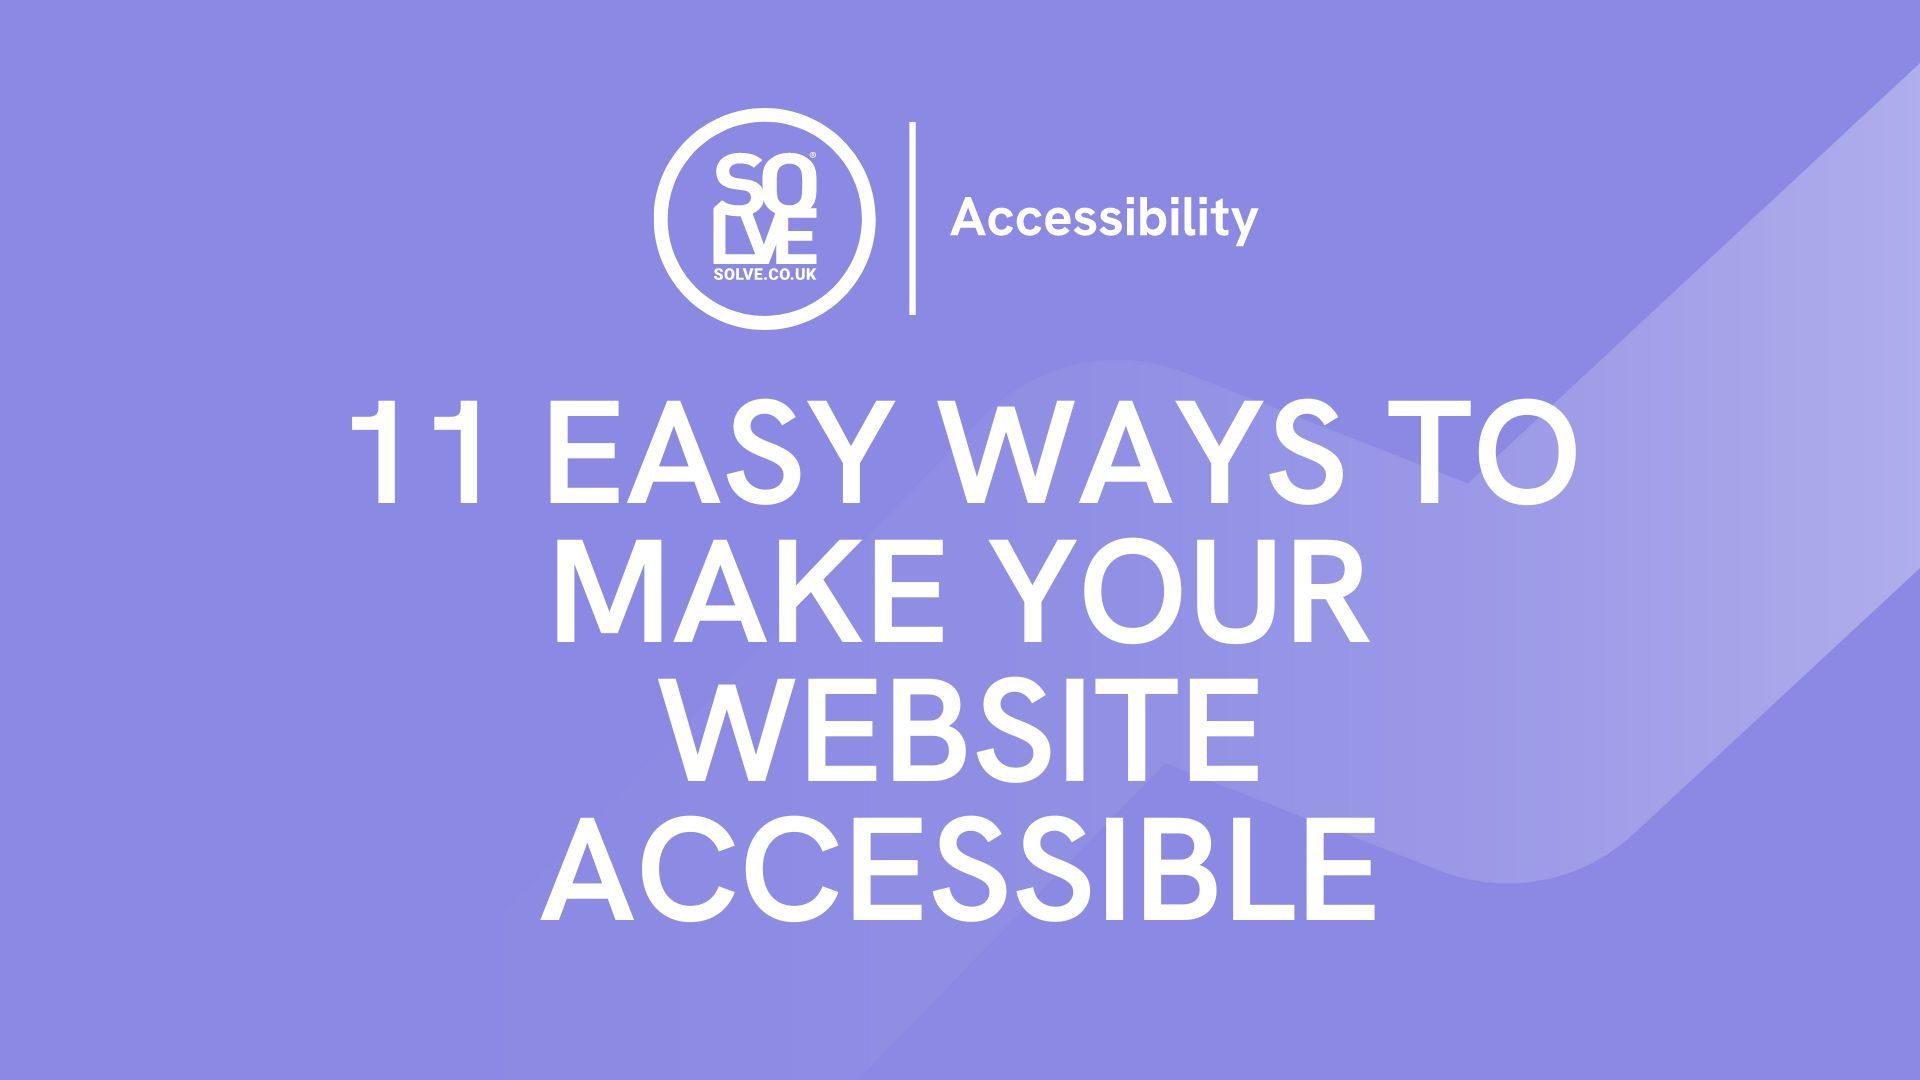 11 EASY Ways To Make Your Website Accessible 1